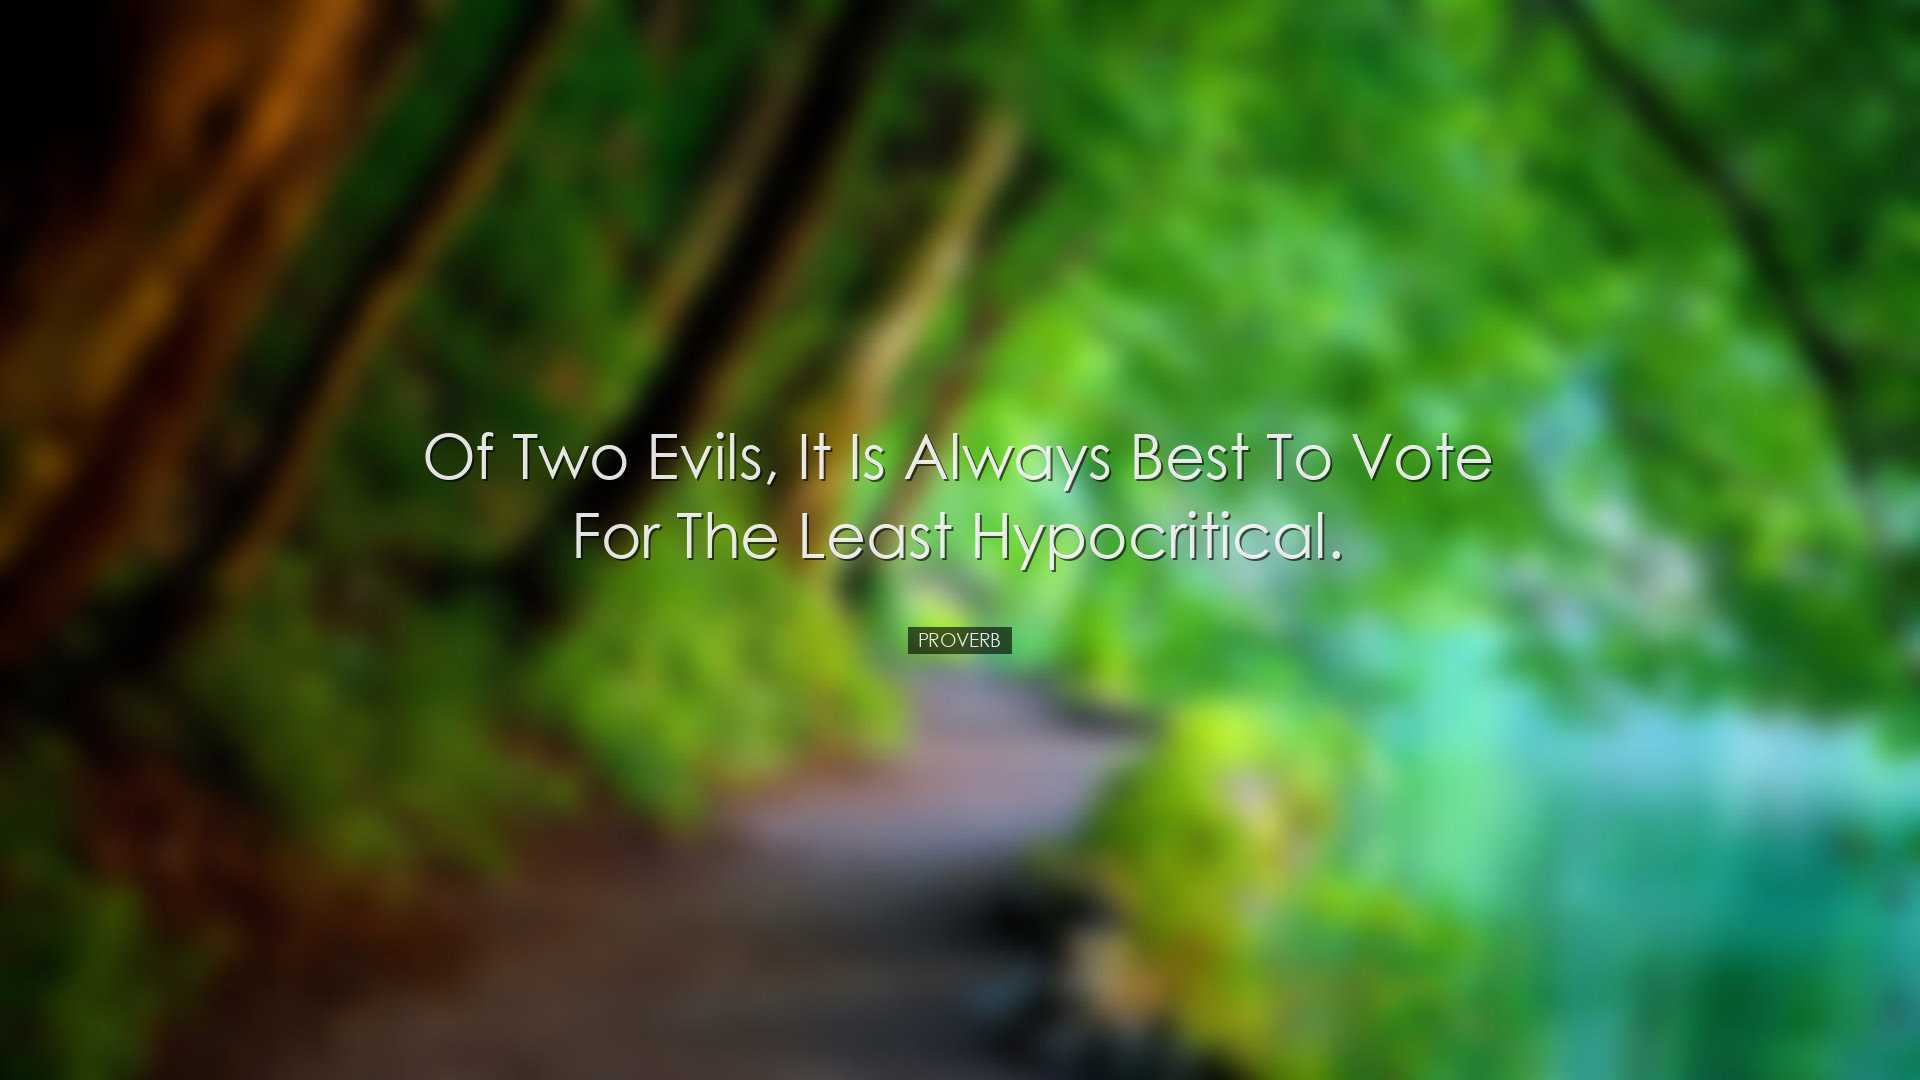 Of two evils, it is always best to vote for the least hypocritical